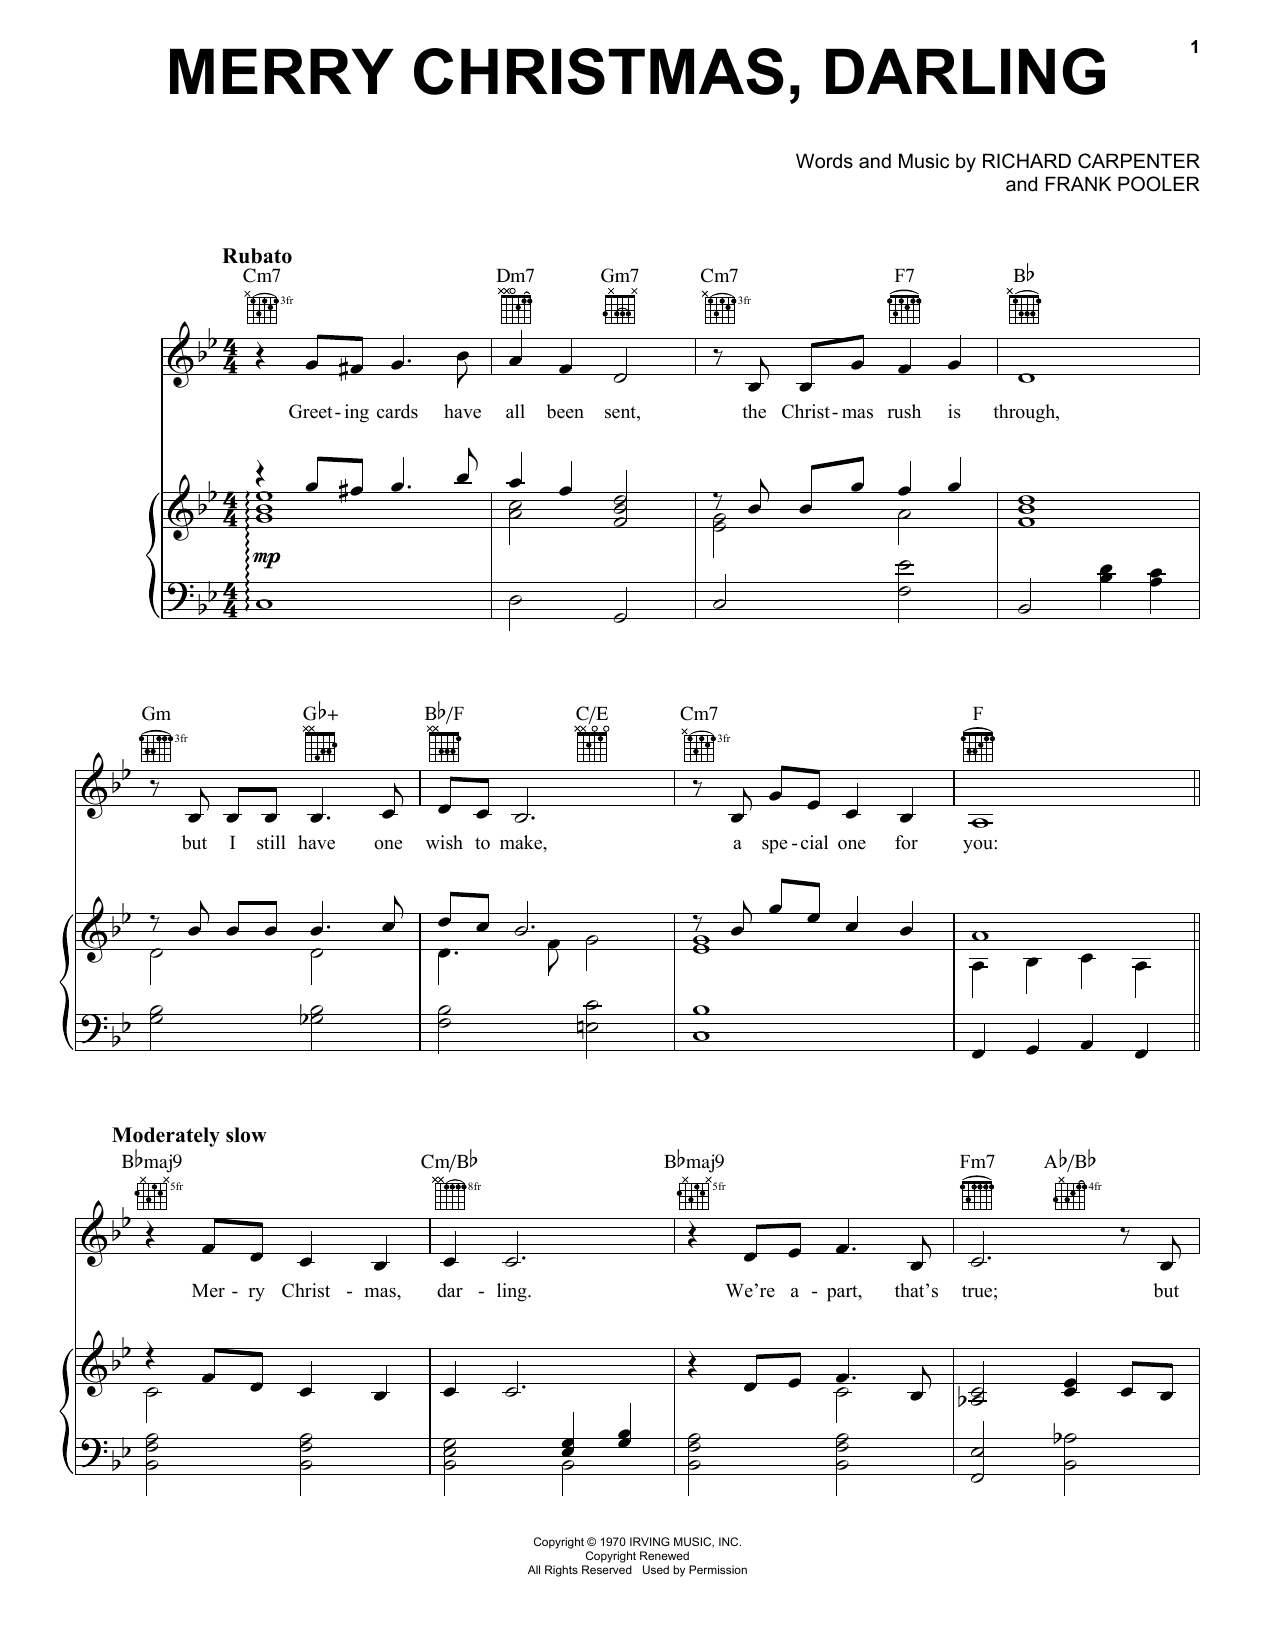 Carpenters Merry Christmas Darling Sheet Music Pdf Notes Chords Winter Score Piano Solo Download Printable Sku 173278